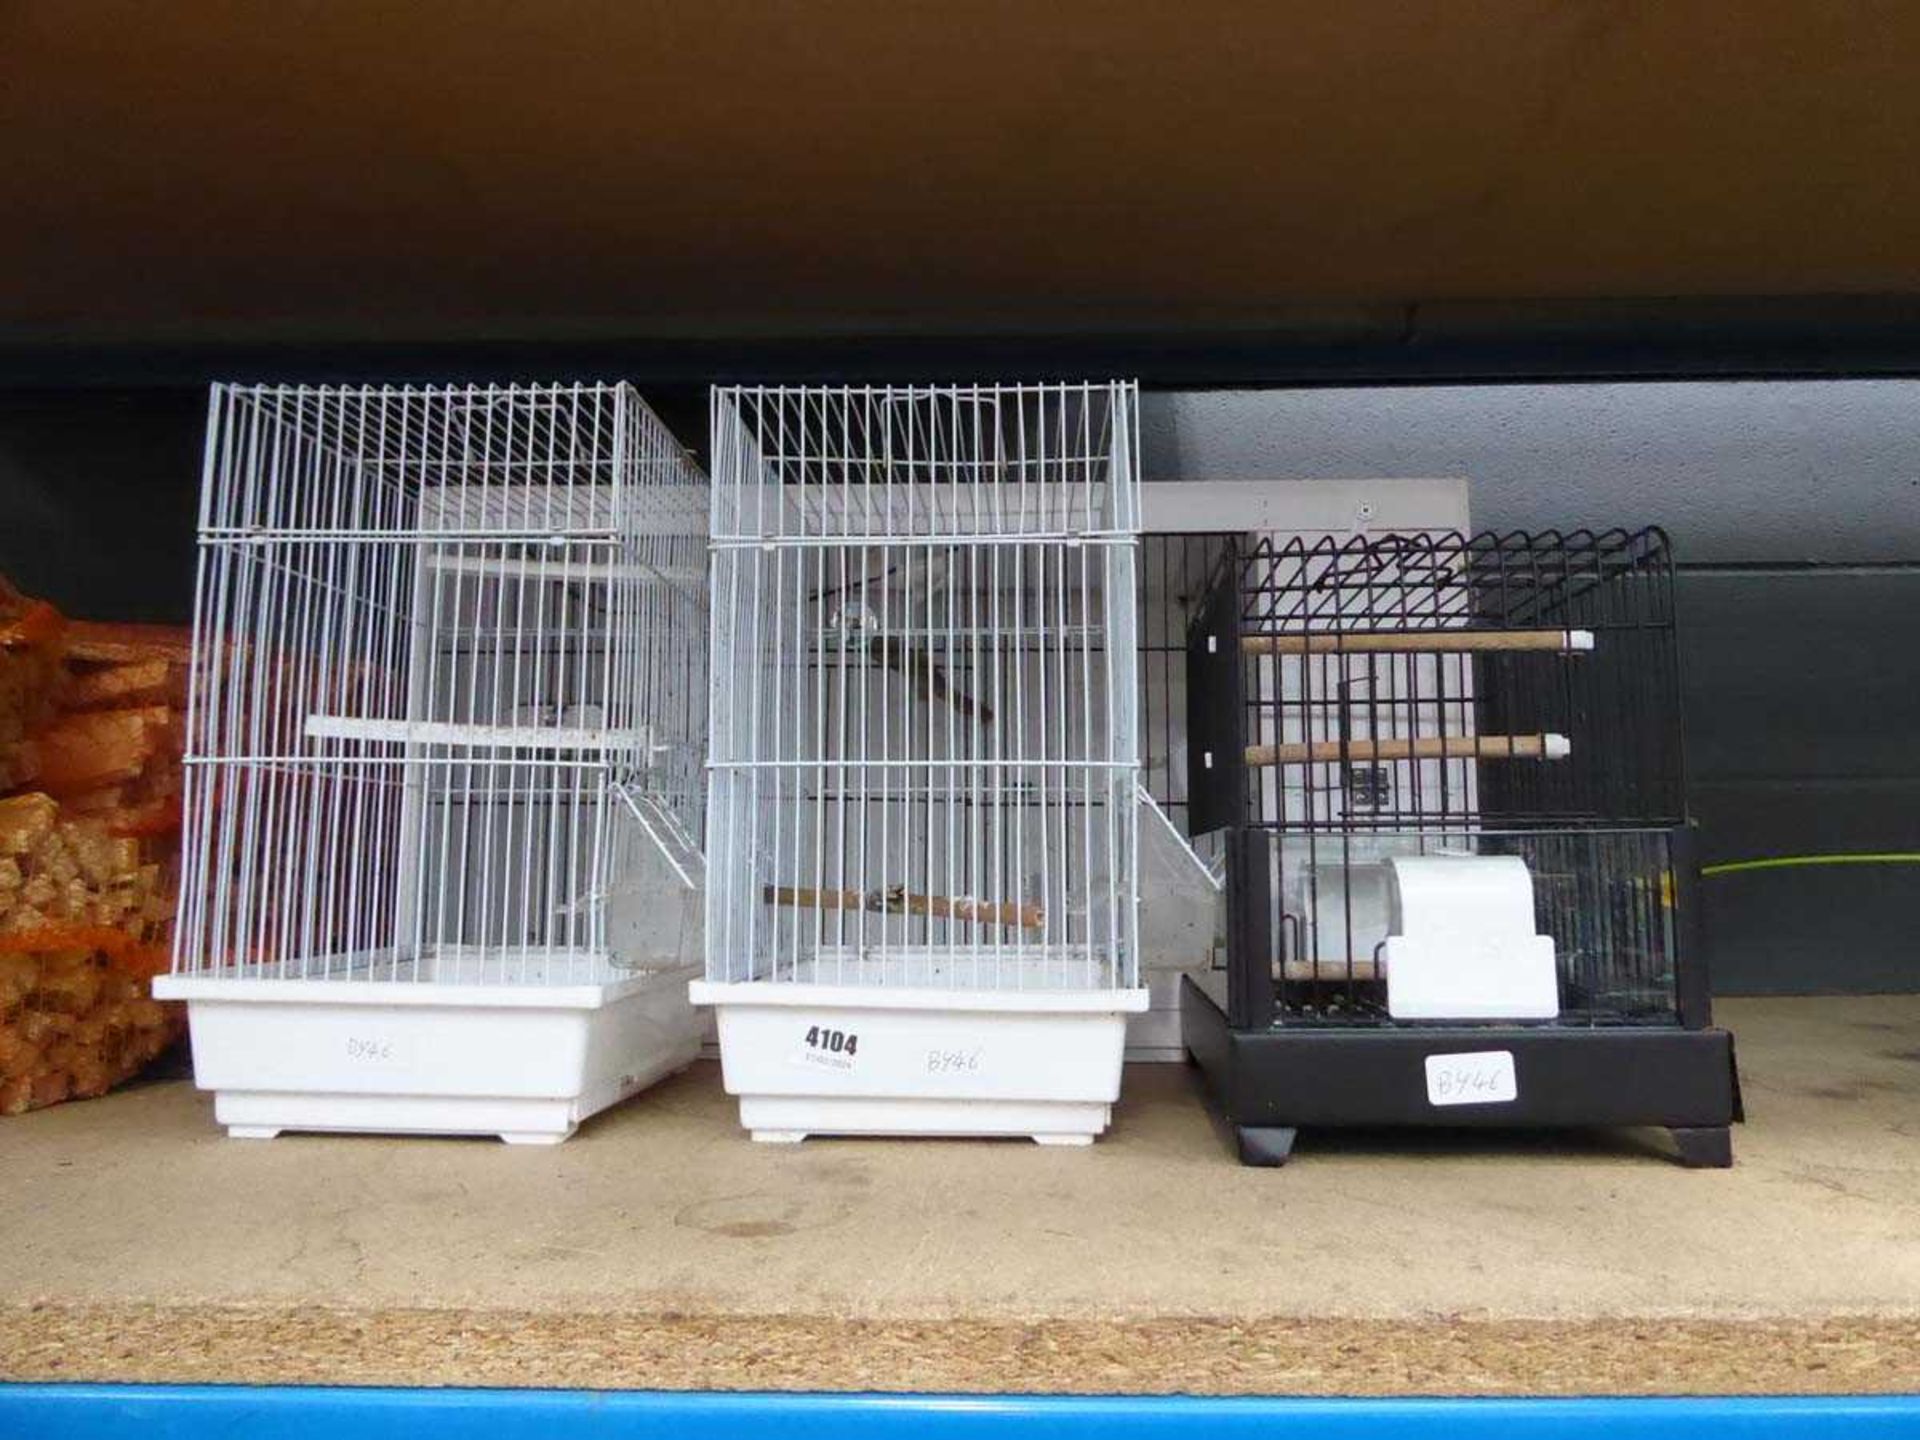 3 small and 1 large bird cage